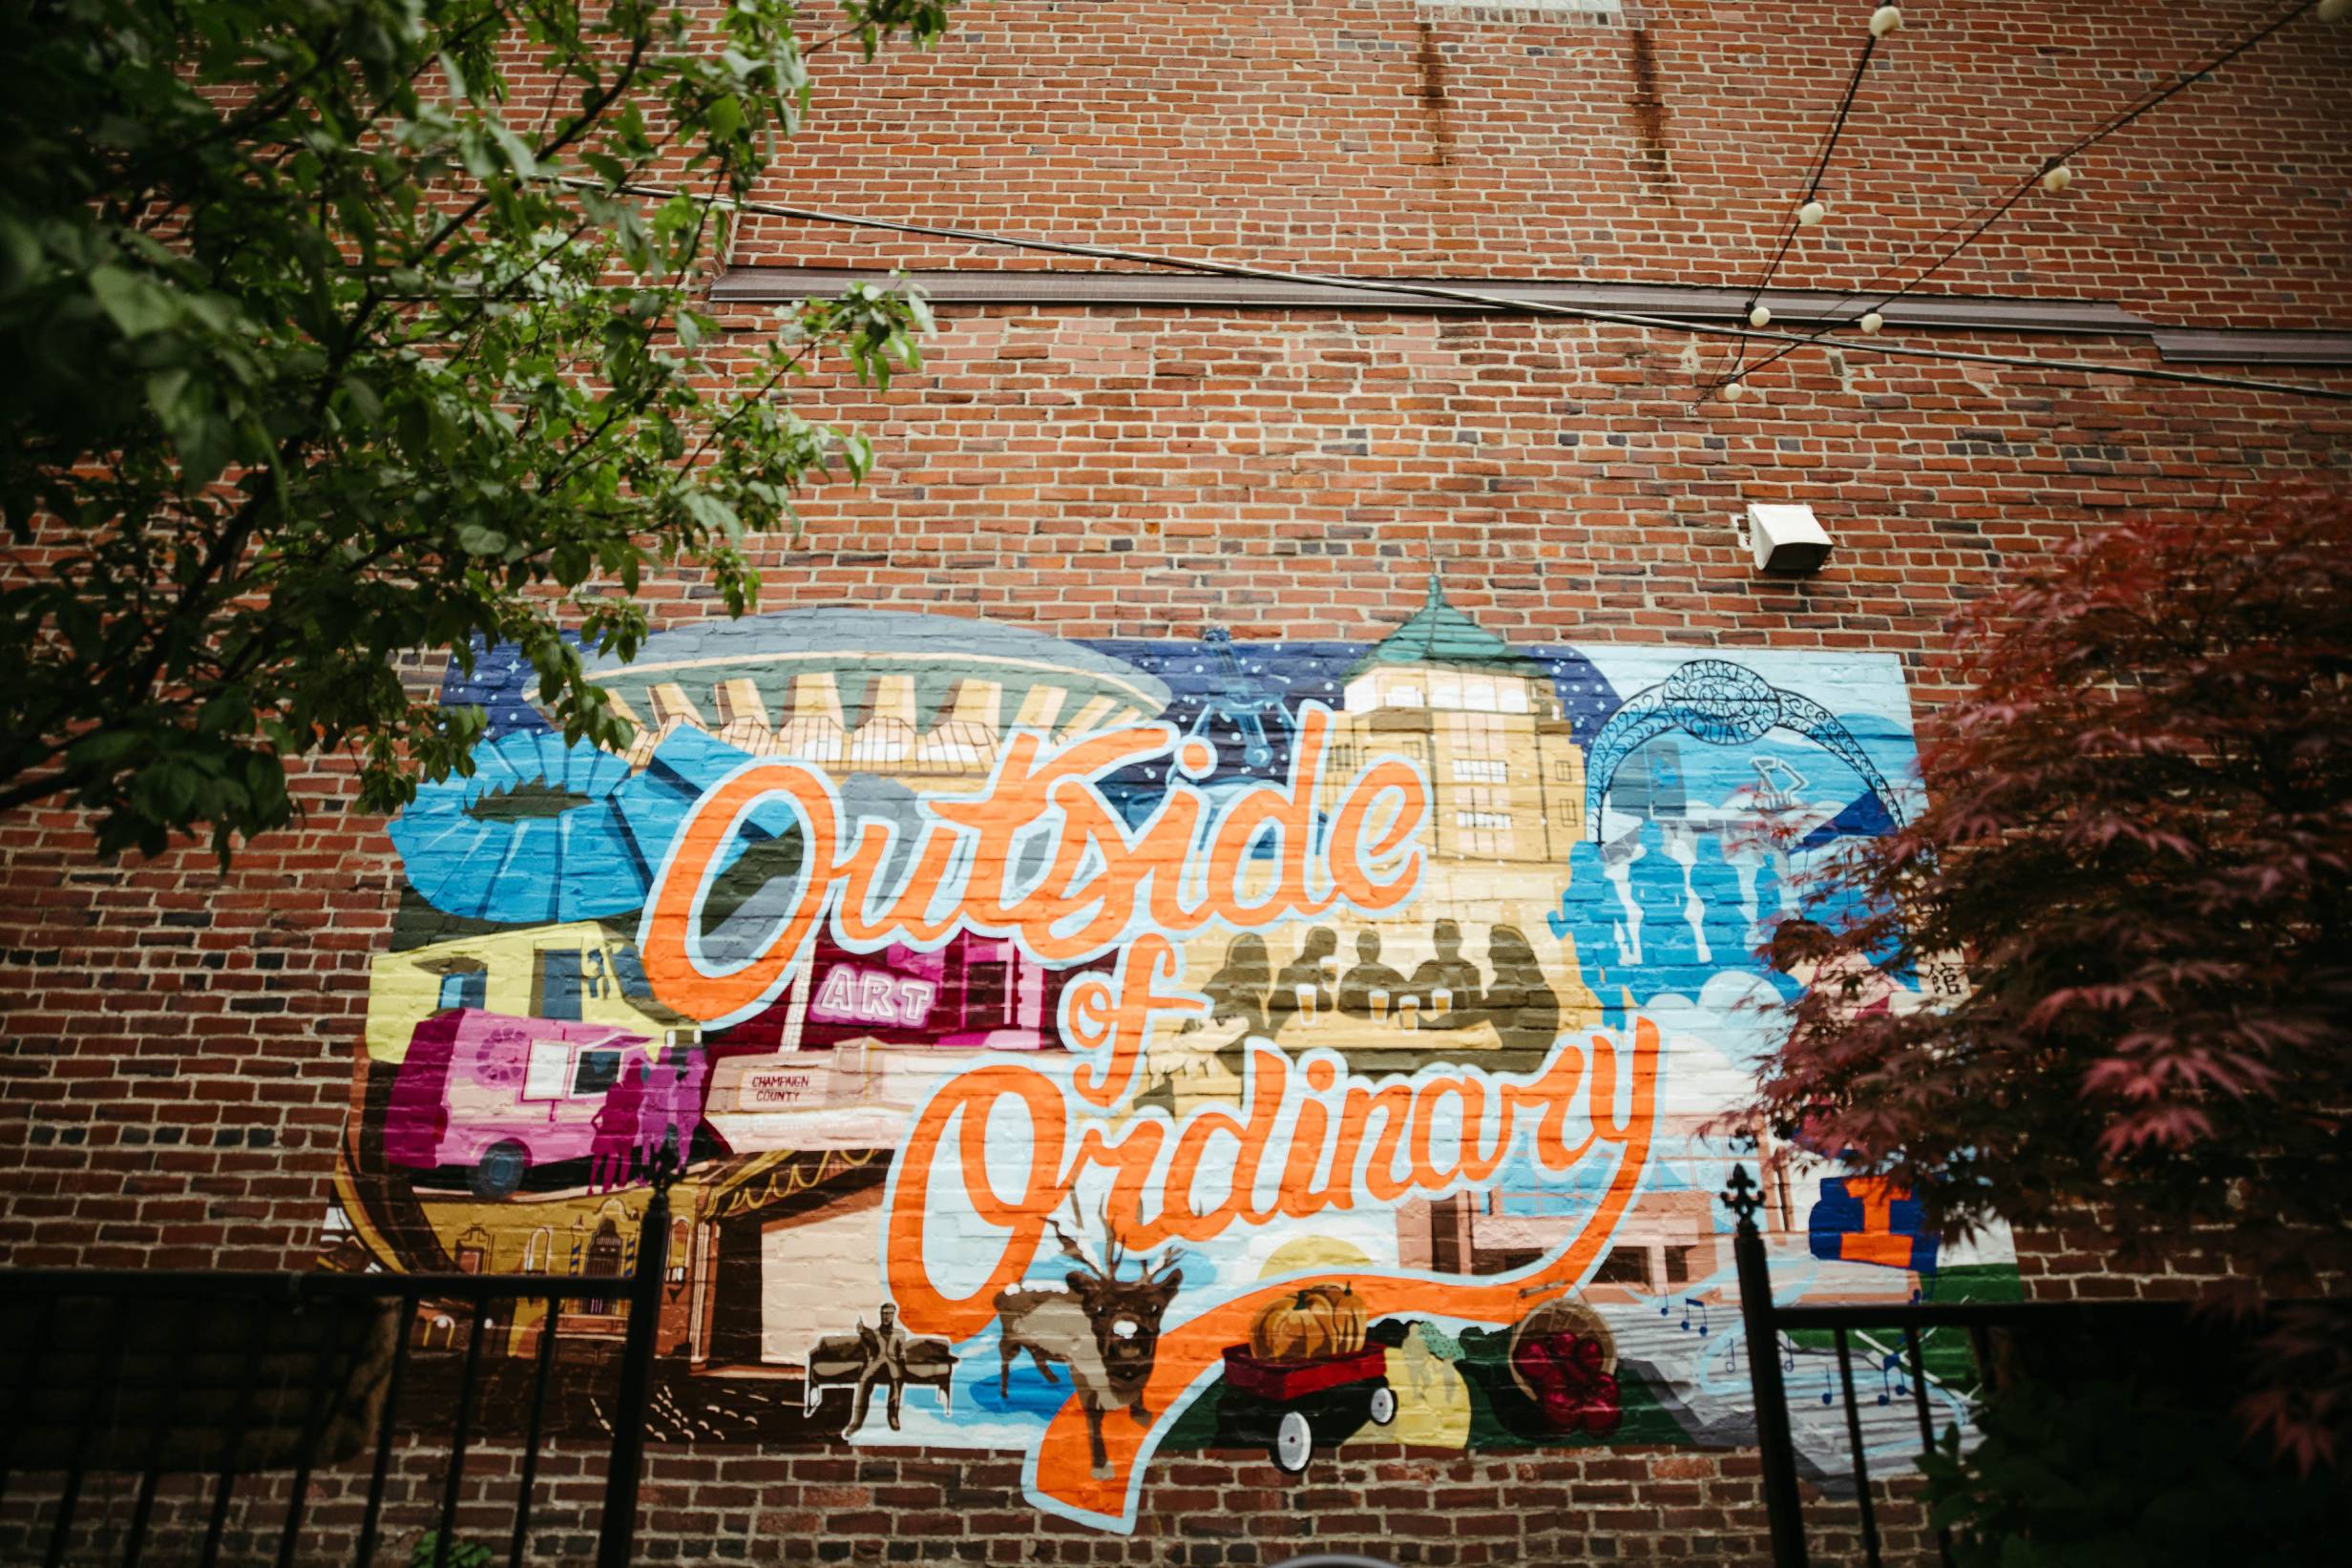 A brick wall featuring a mural stating "Outside of Ordinary"